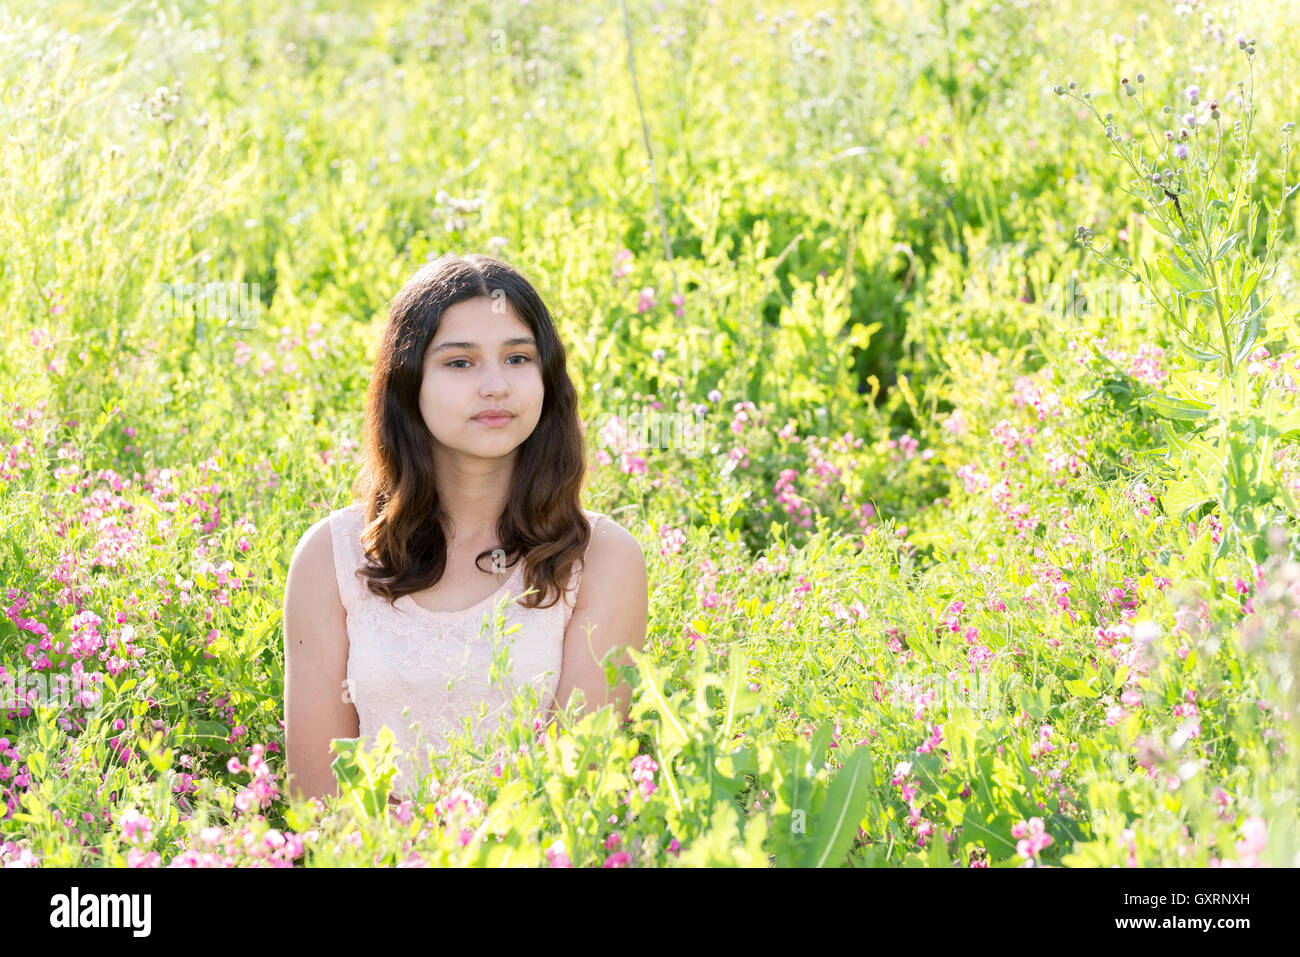 Modest well-groomed girl on summer meadow Stock Photo